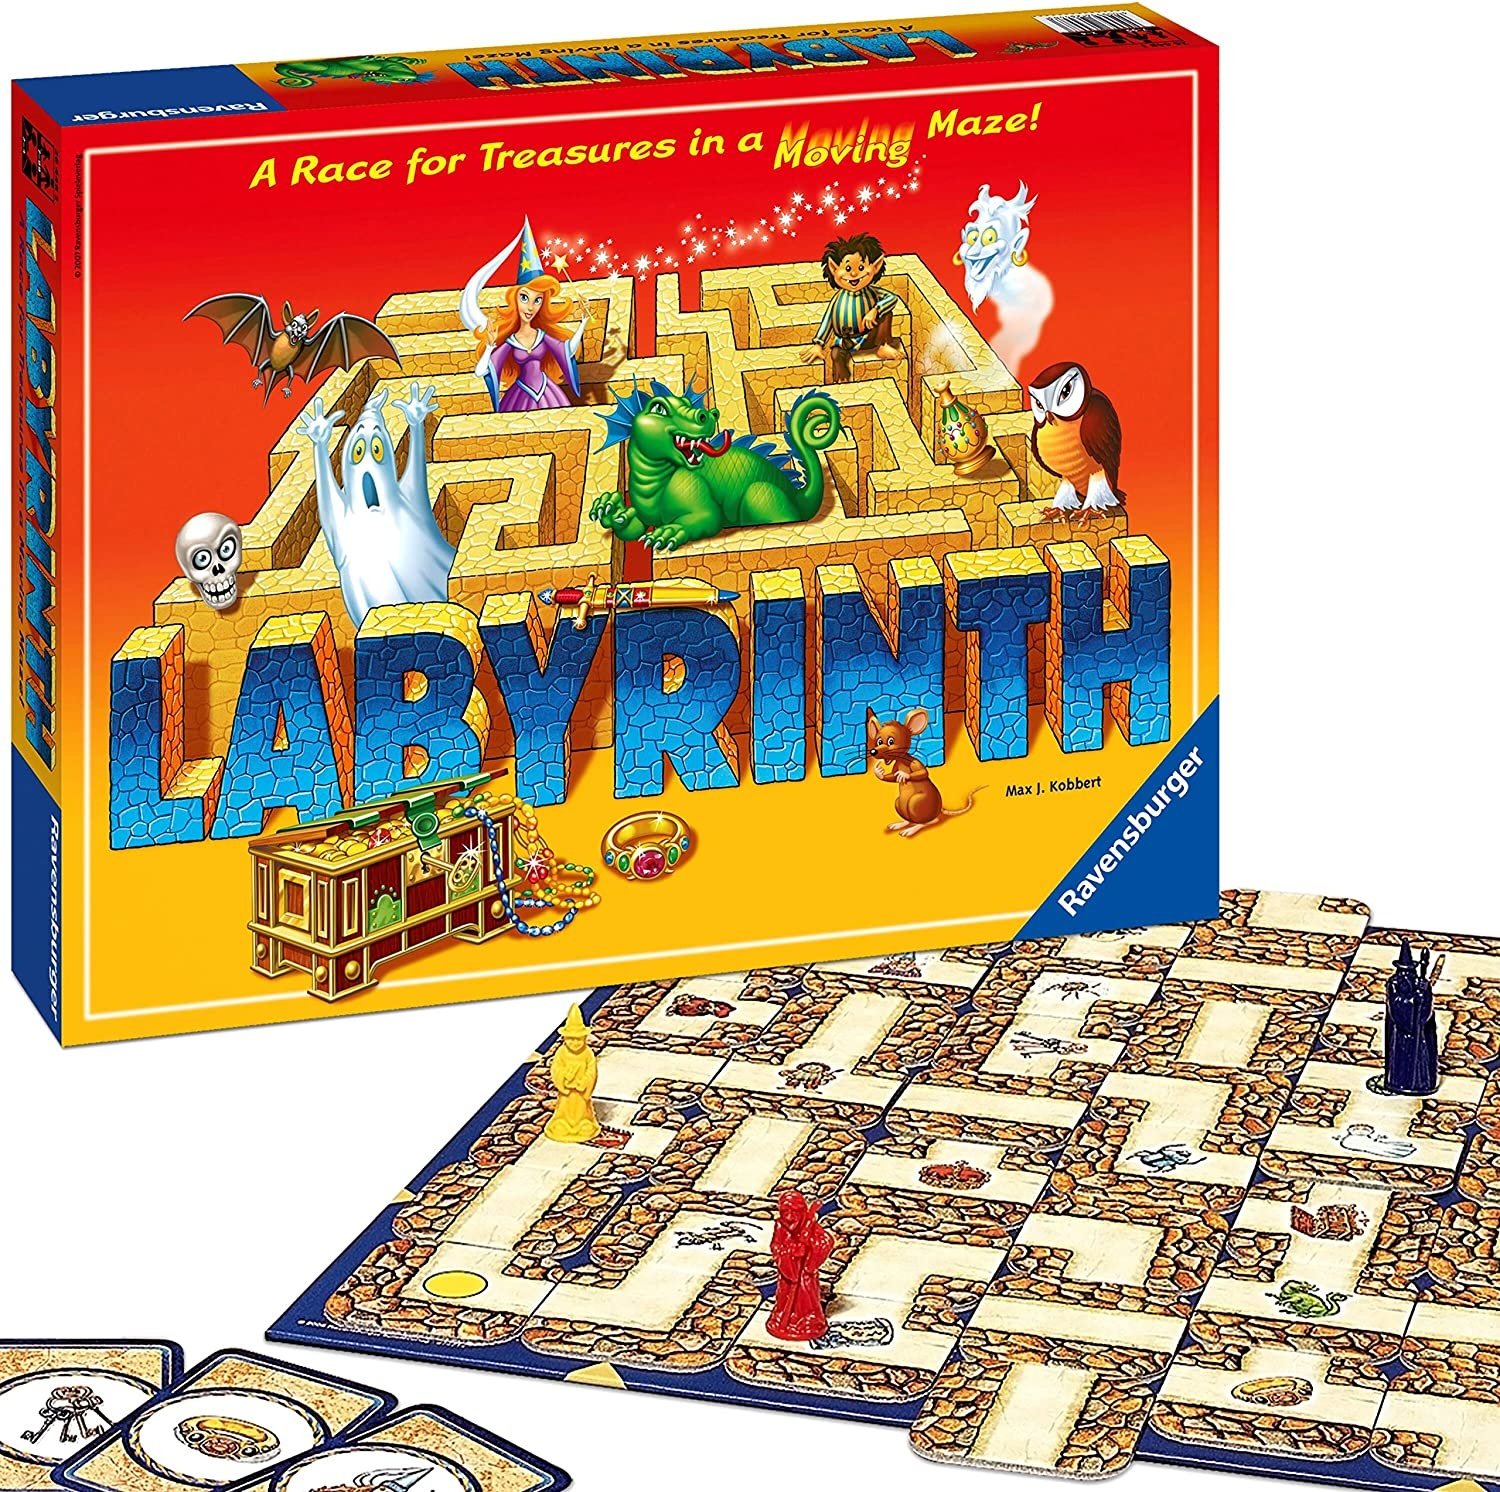 Ravensburger Harry Potter Labyrinth Family Board Game for Kids & Adults Age  7 & Up - So Easy to Learn & Play with Great Replay Value